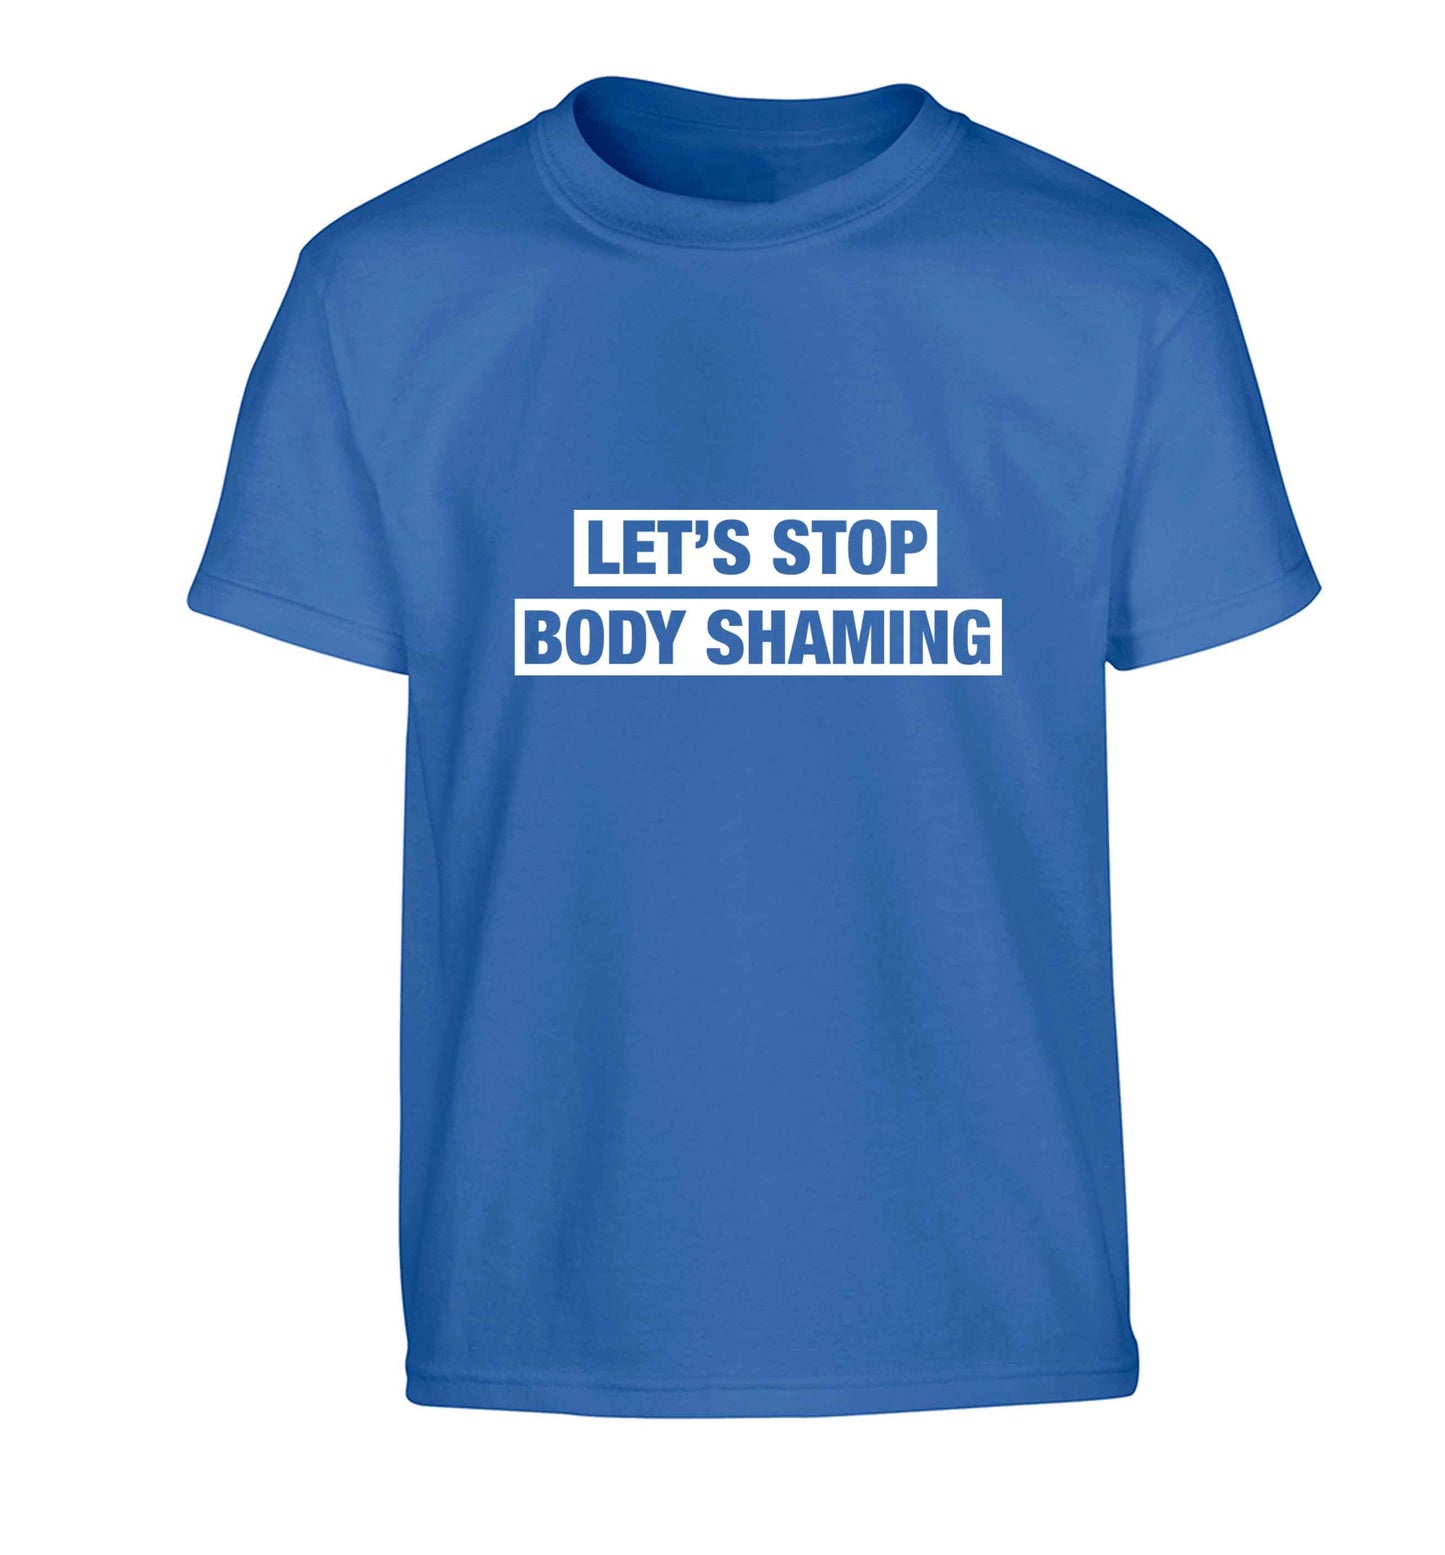 Let's stop body shaming Children's blue Tshirt 12-13 Years